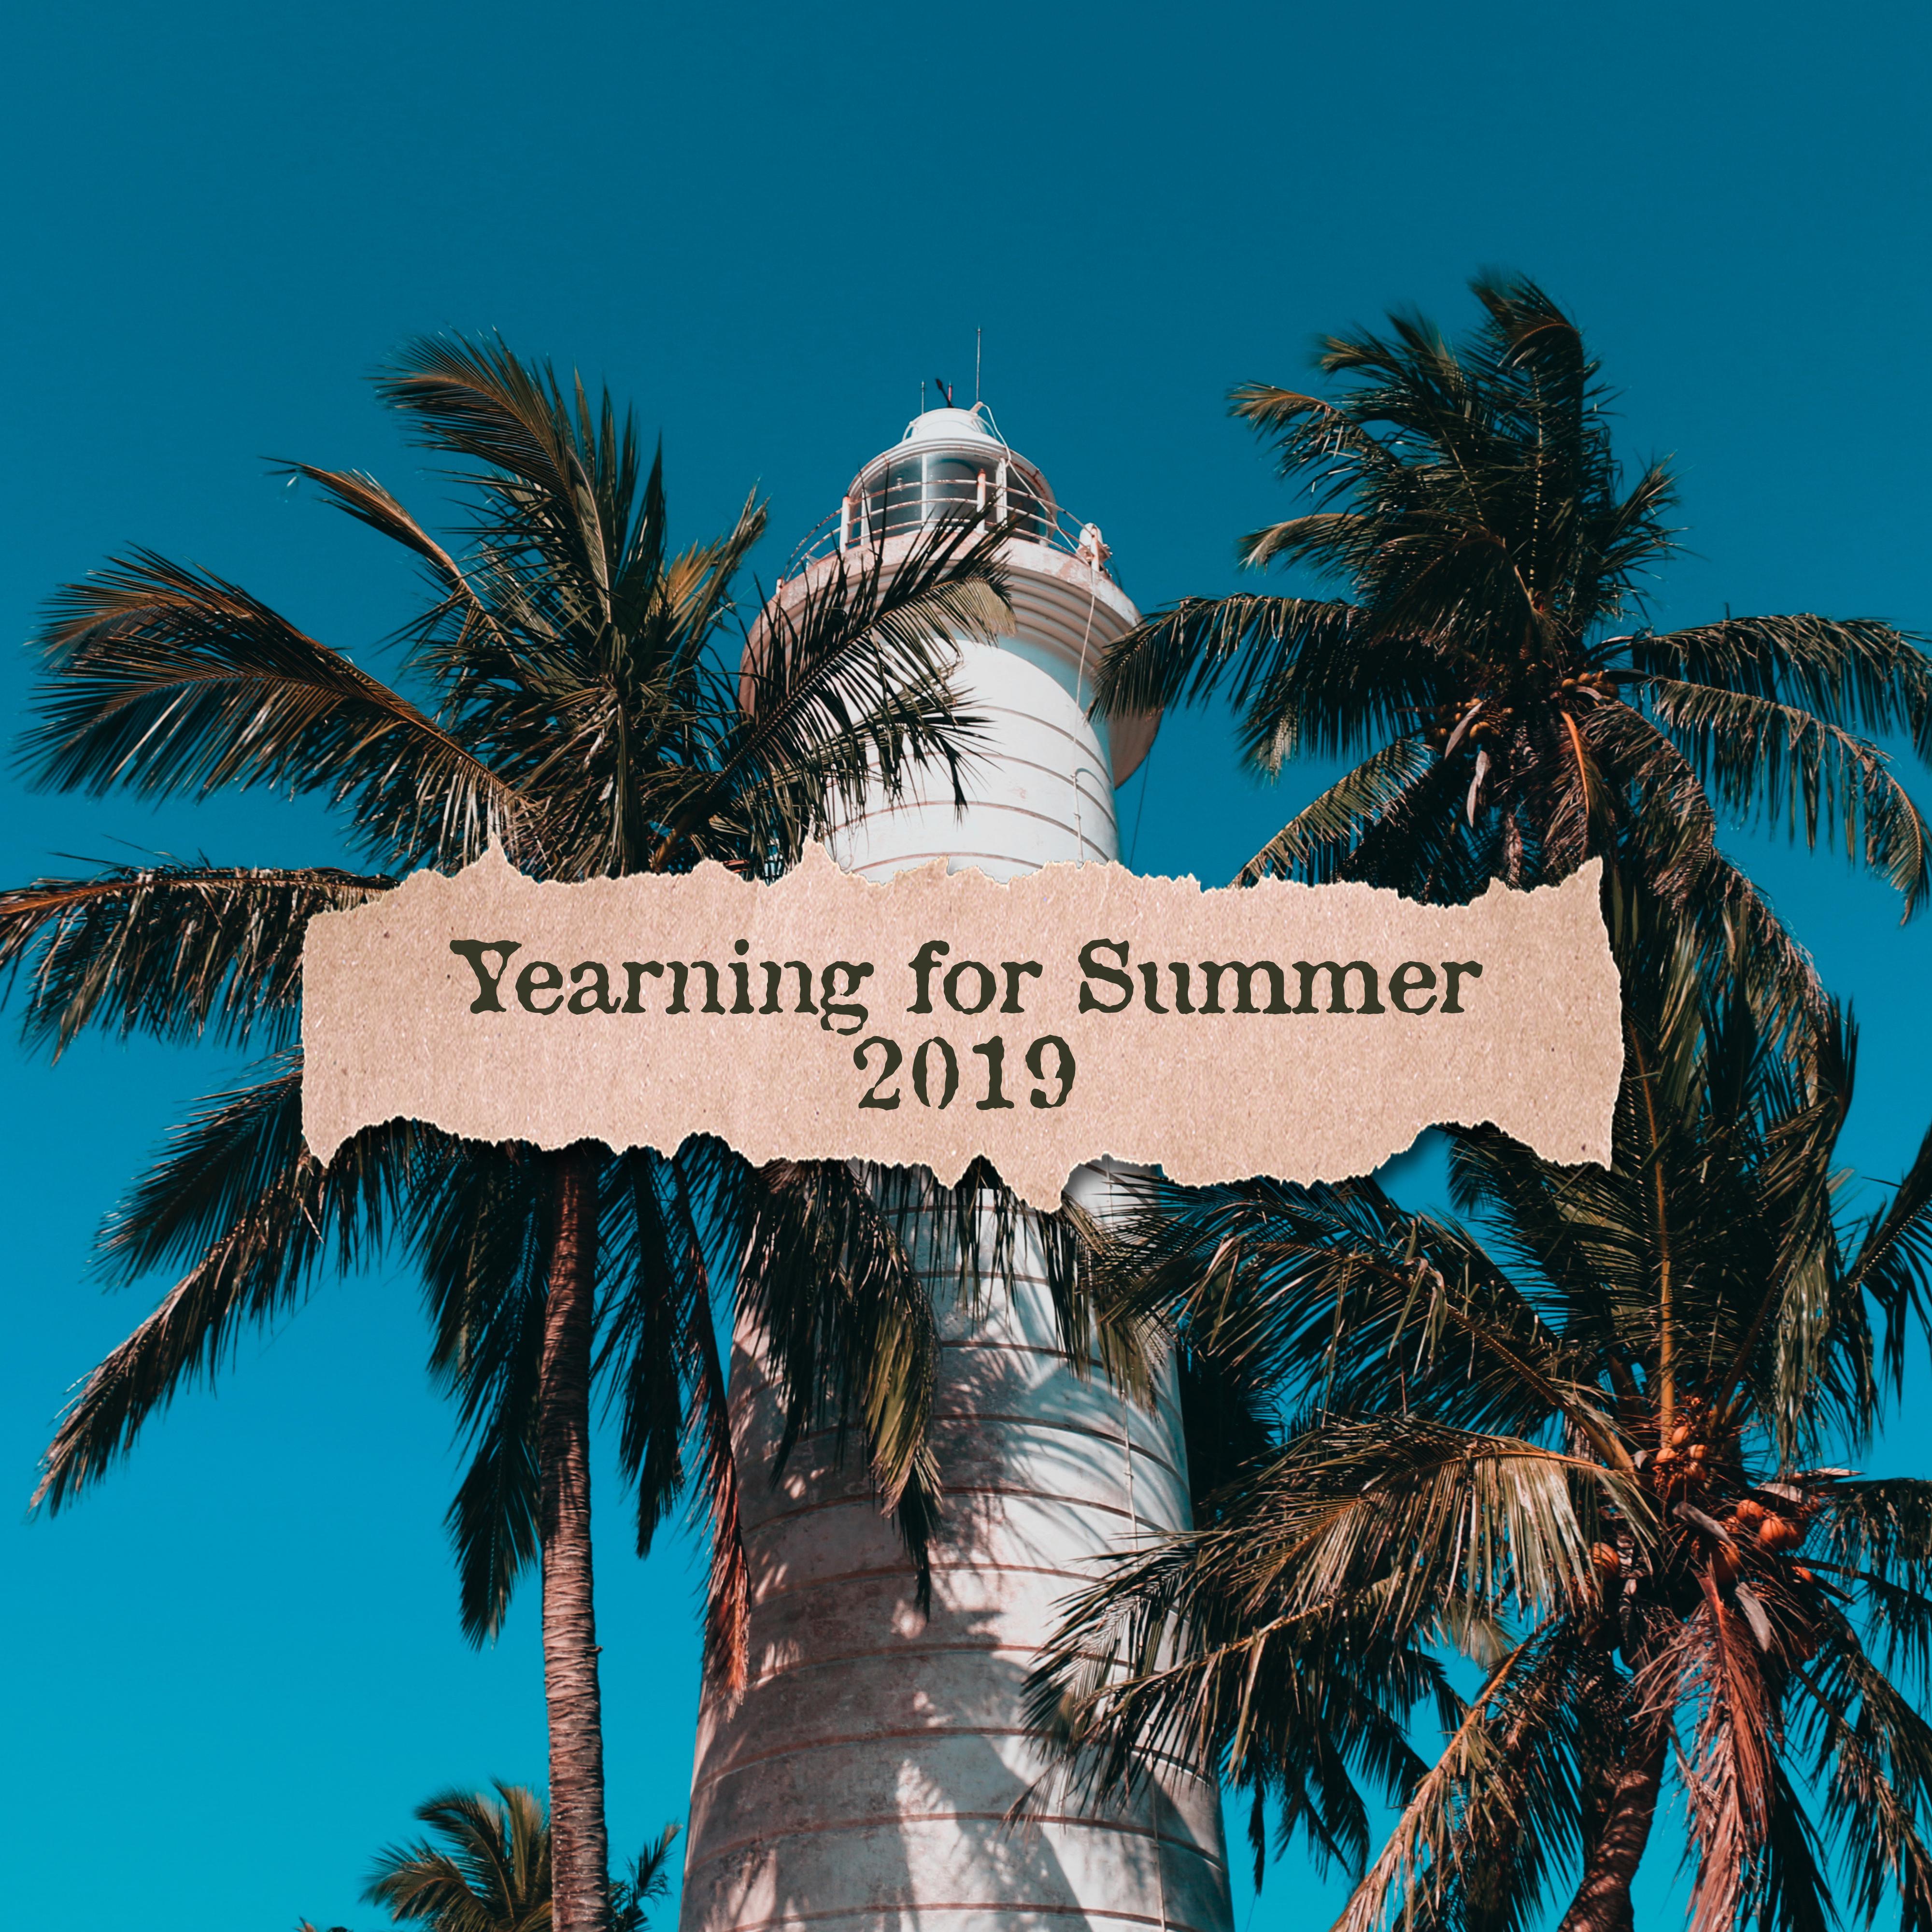 Yearning for Summer 2019: Warm Sounds of Summer, Chillout Melodies to Relax and Rest on the Beach and at Home, Holiday Rhythms from Ibiza